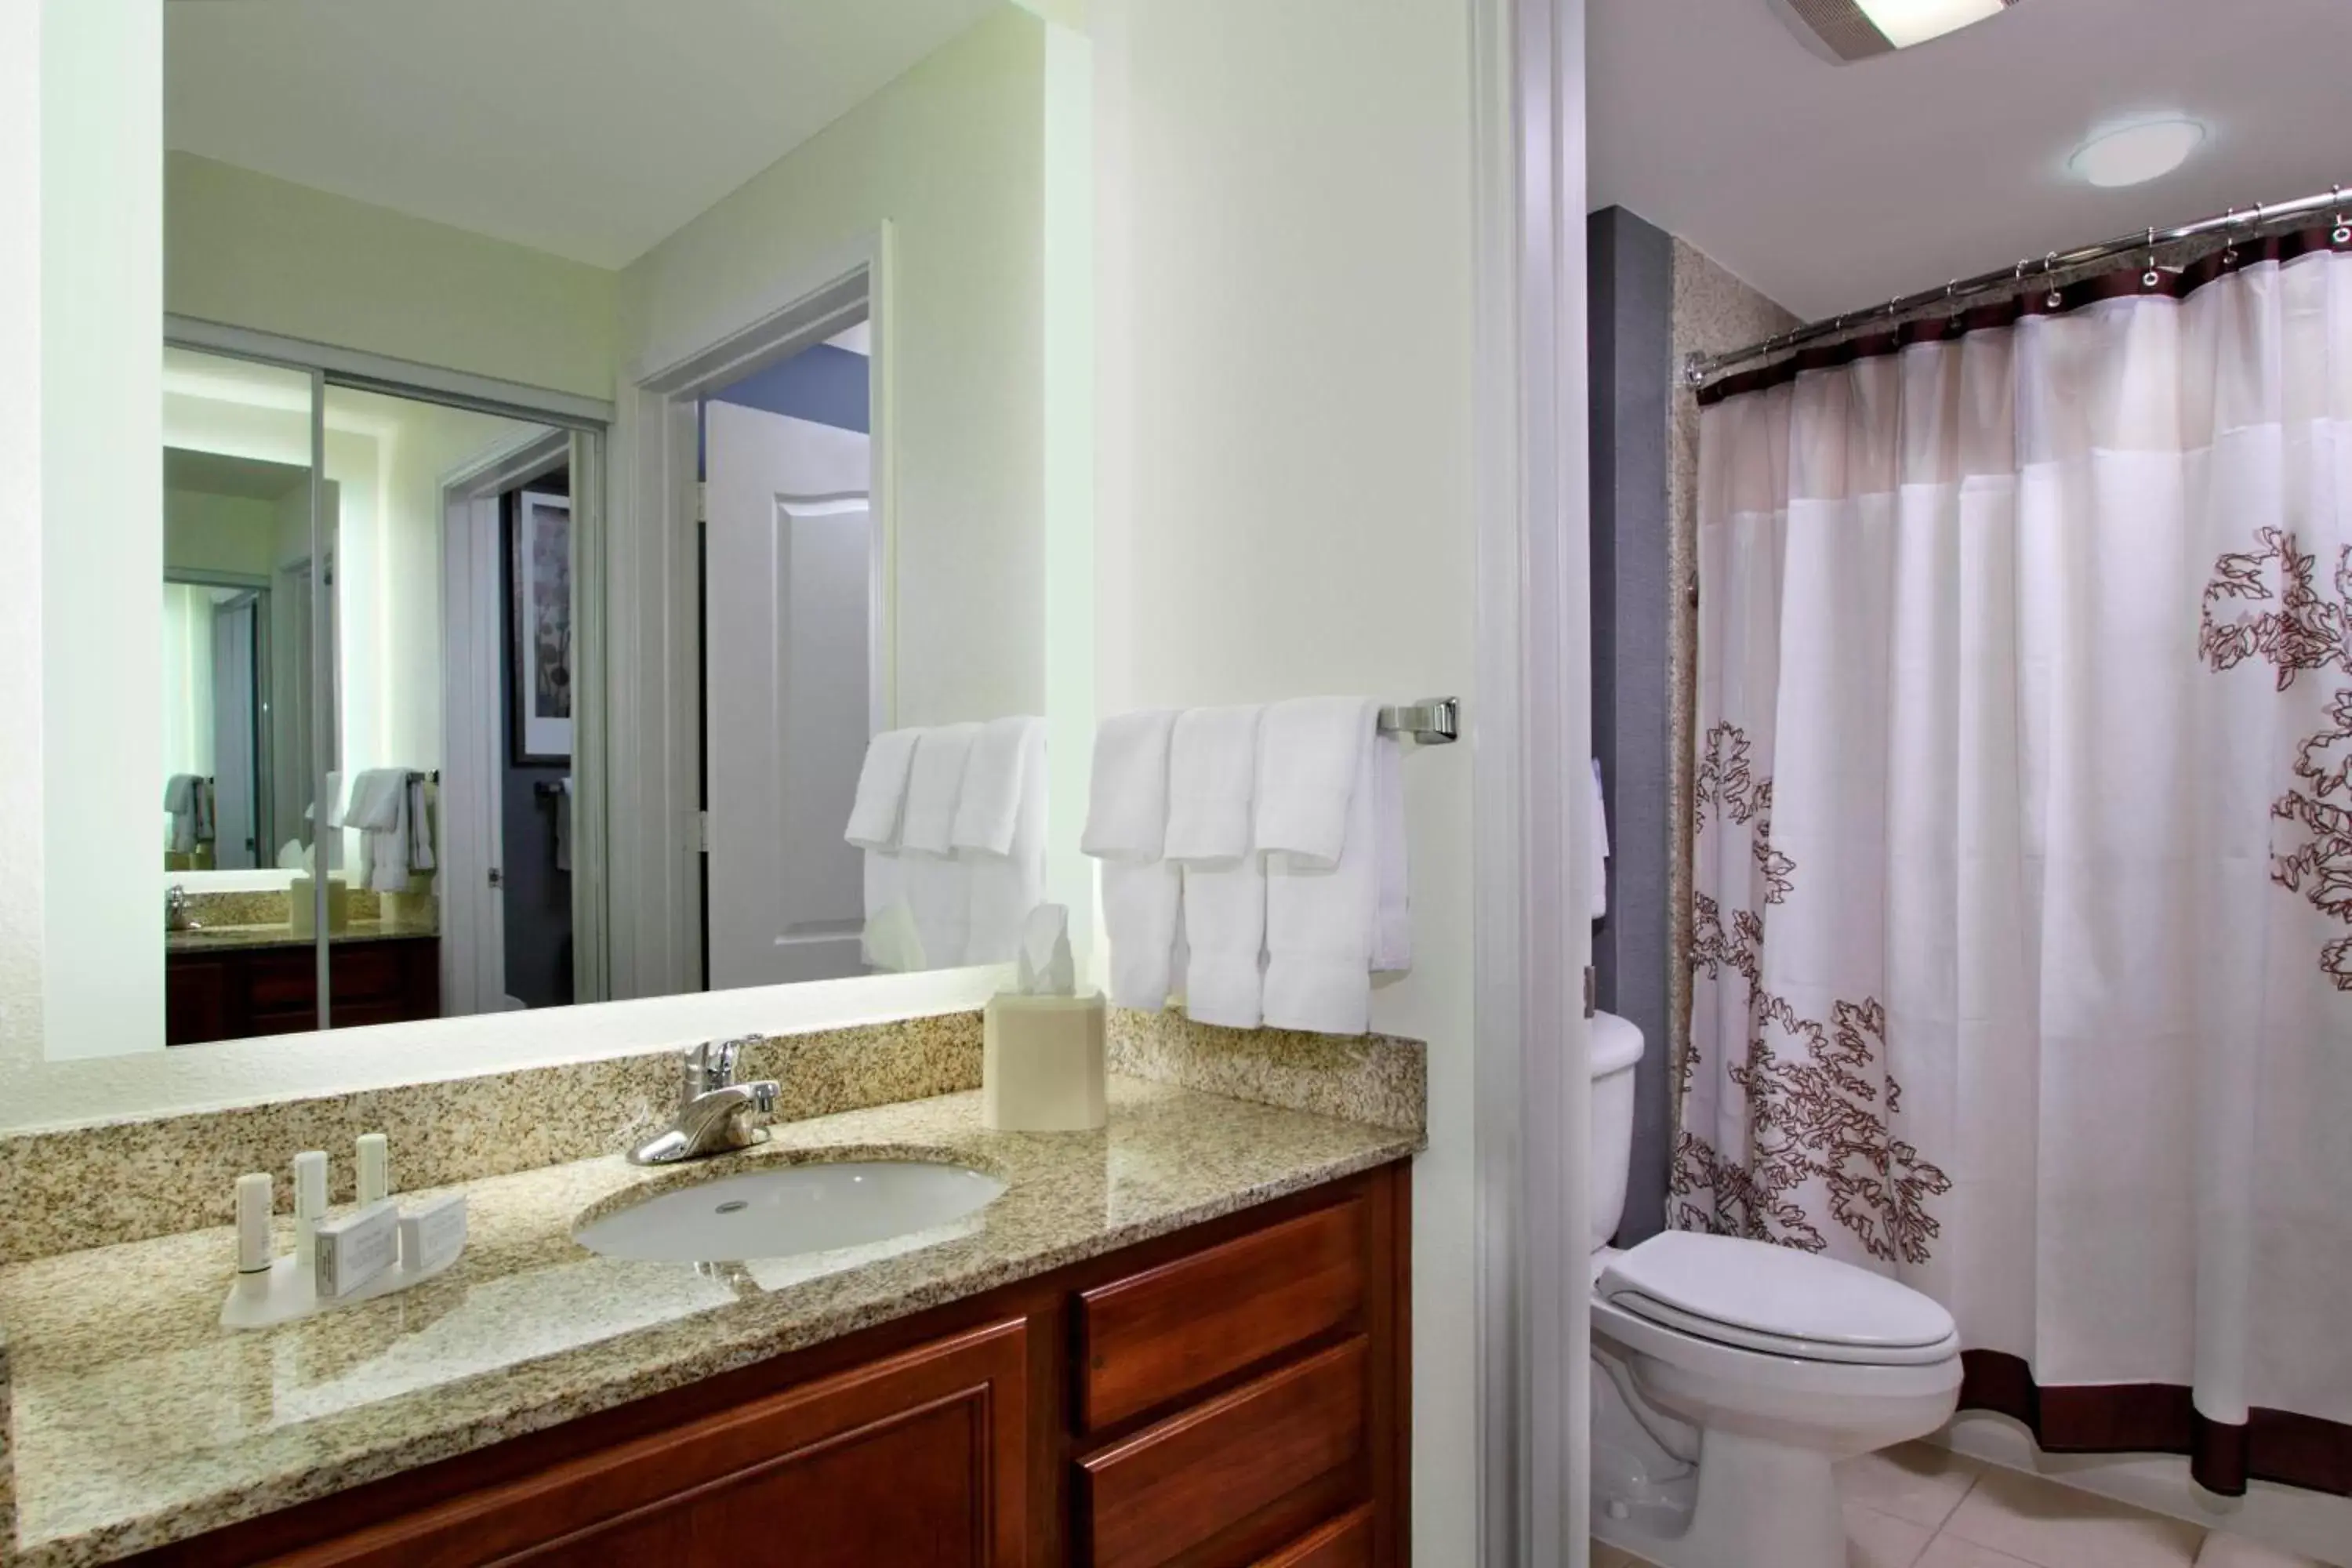 Bathroom in Residence Inn DFW Airport North/Grapevine